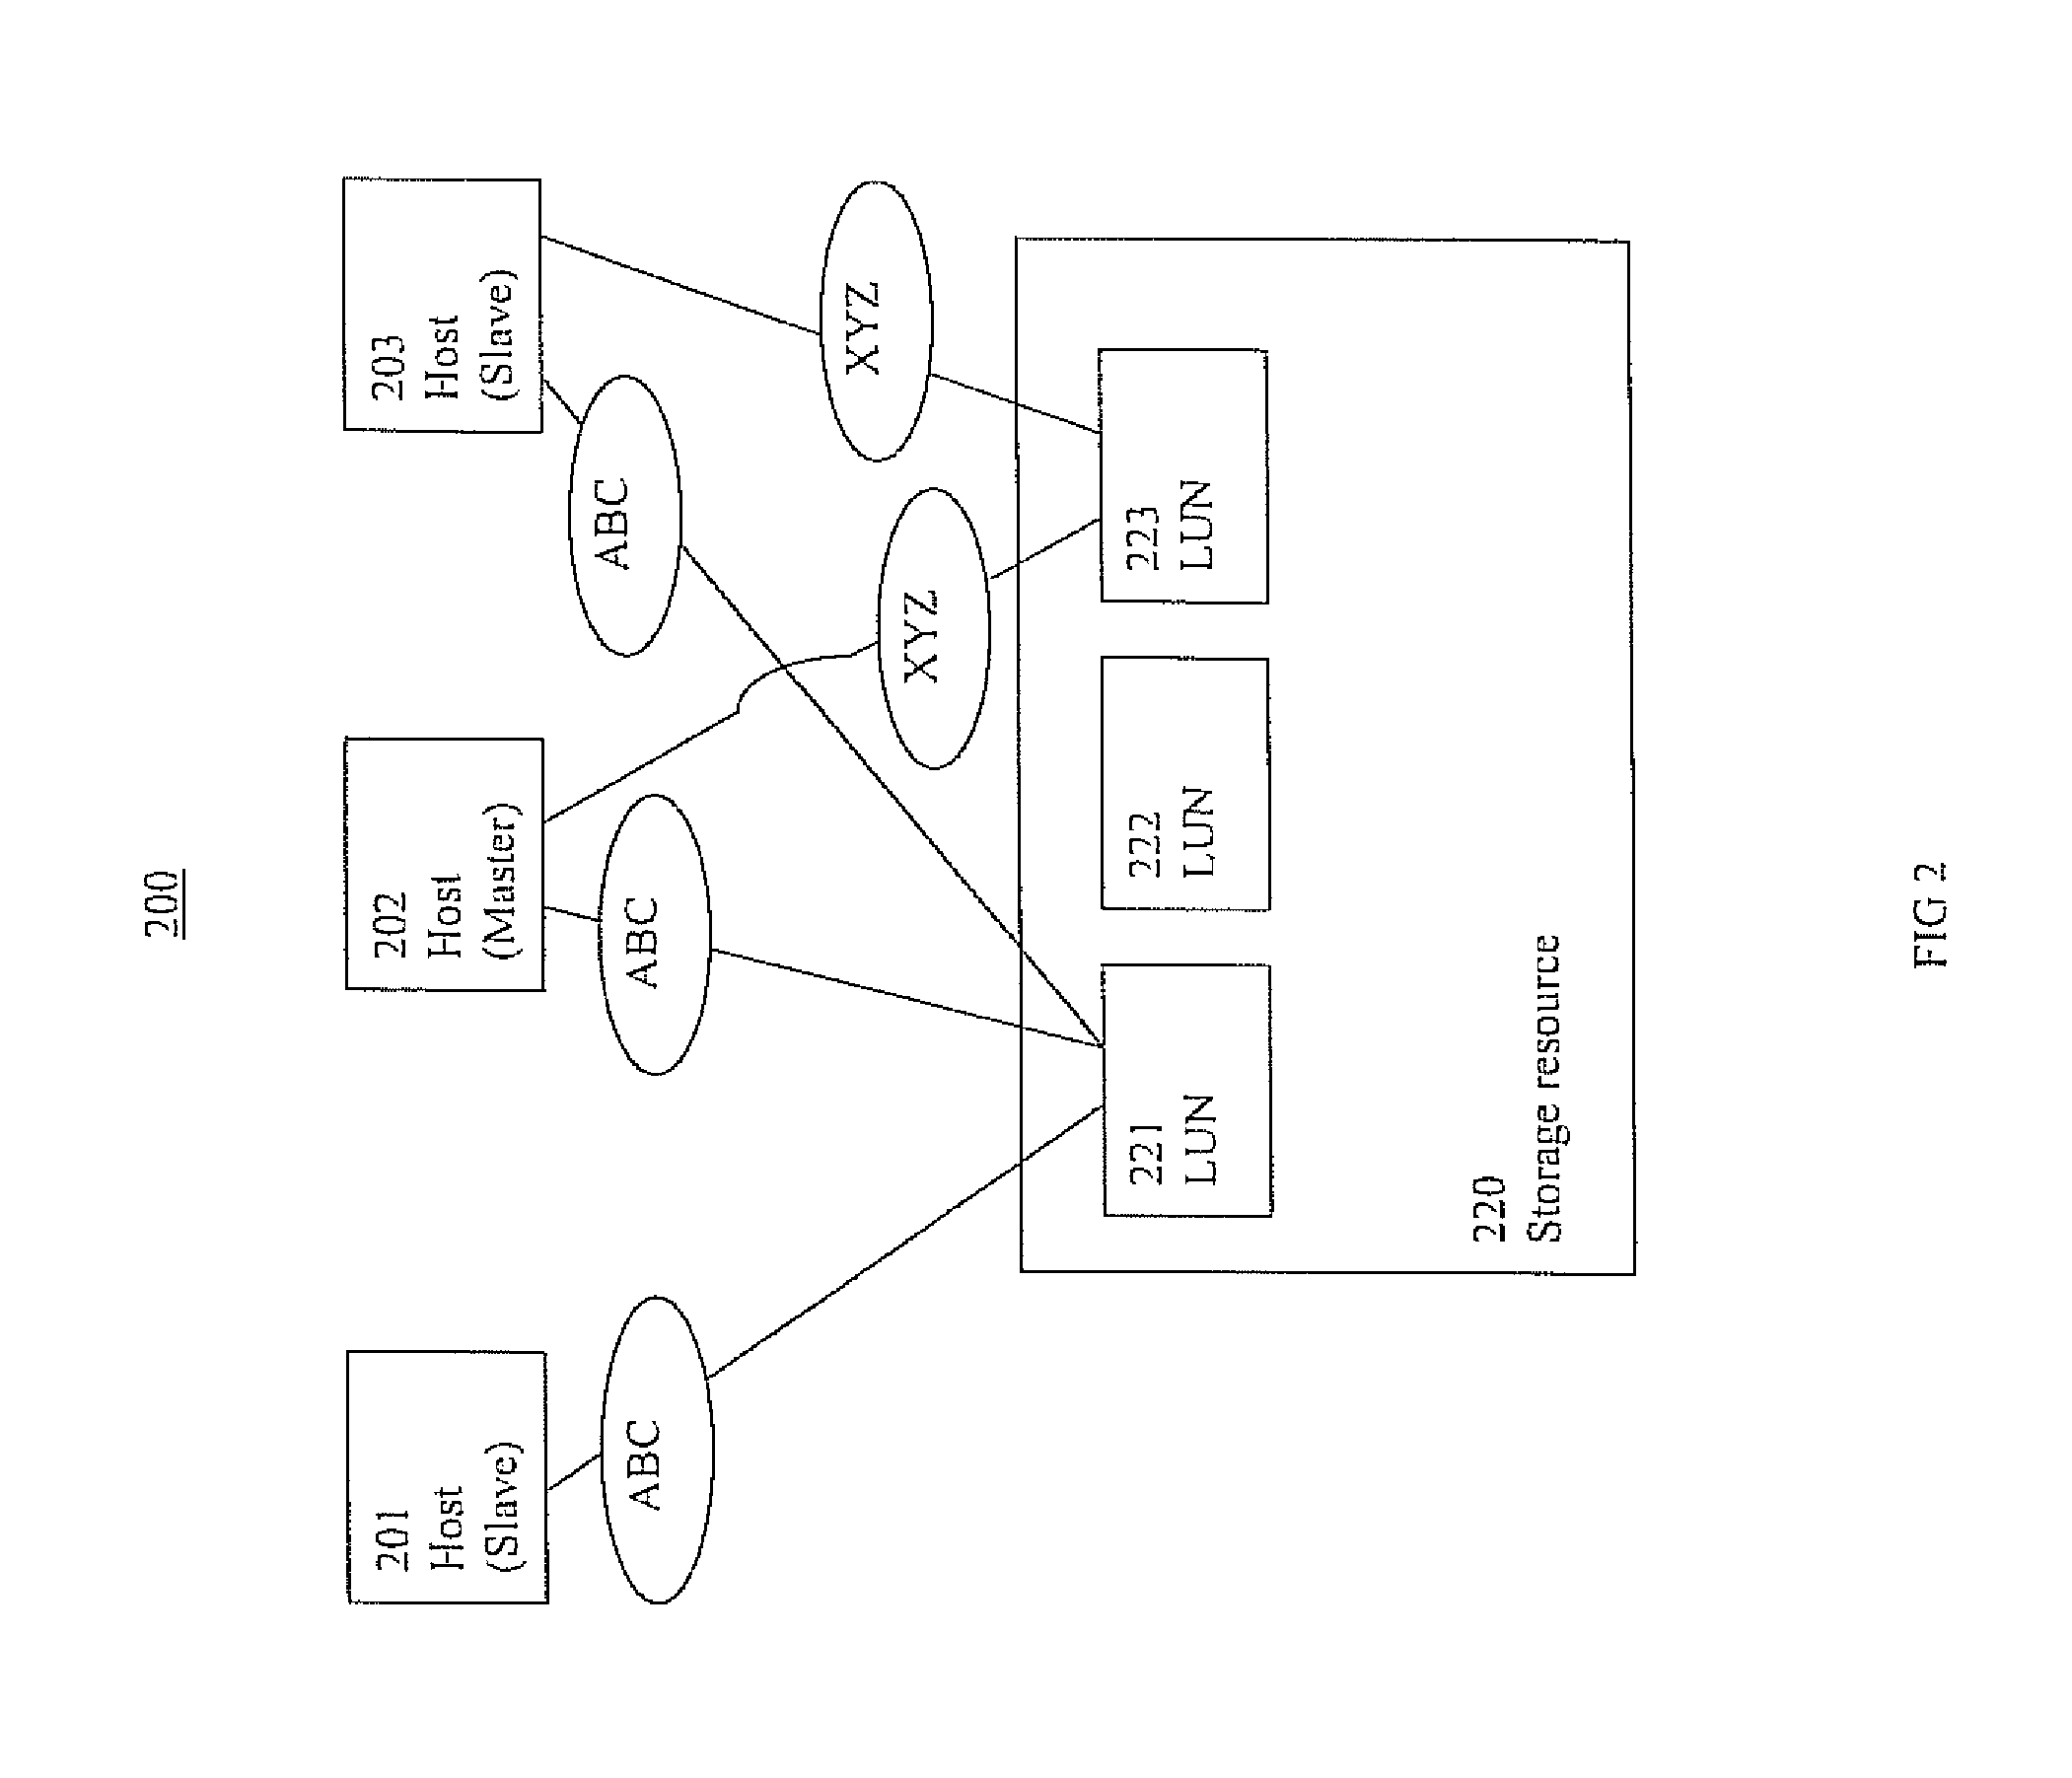 Storage management systems and methods